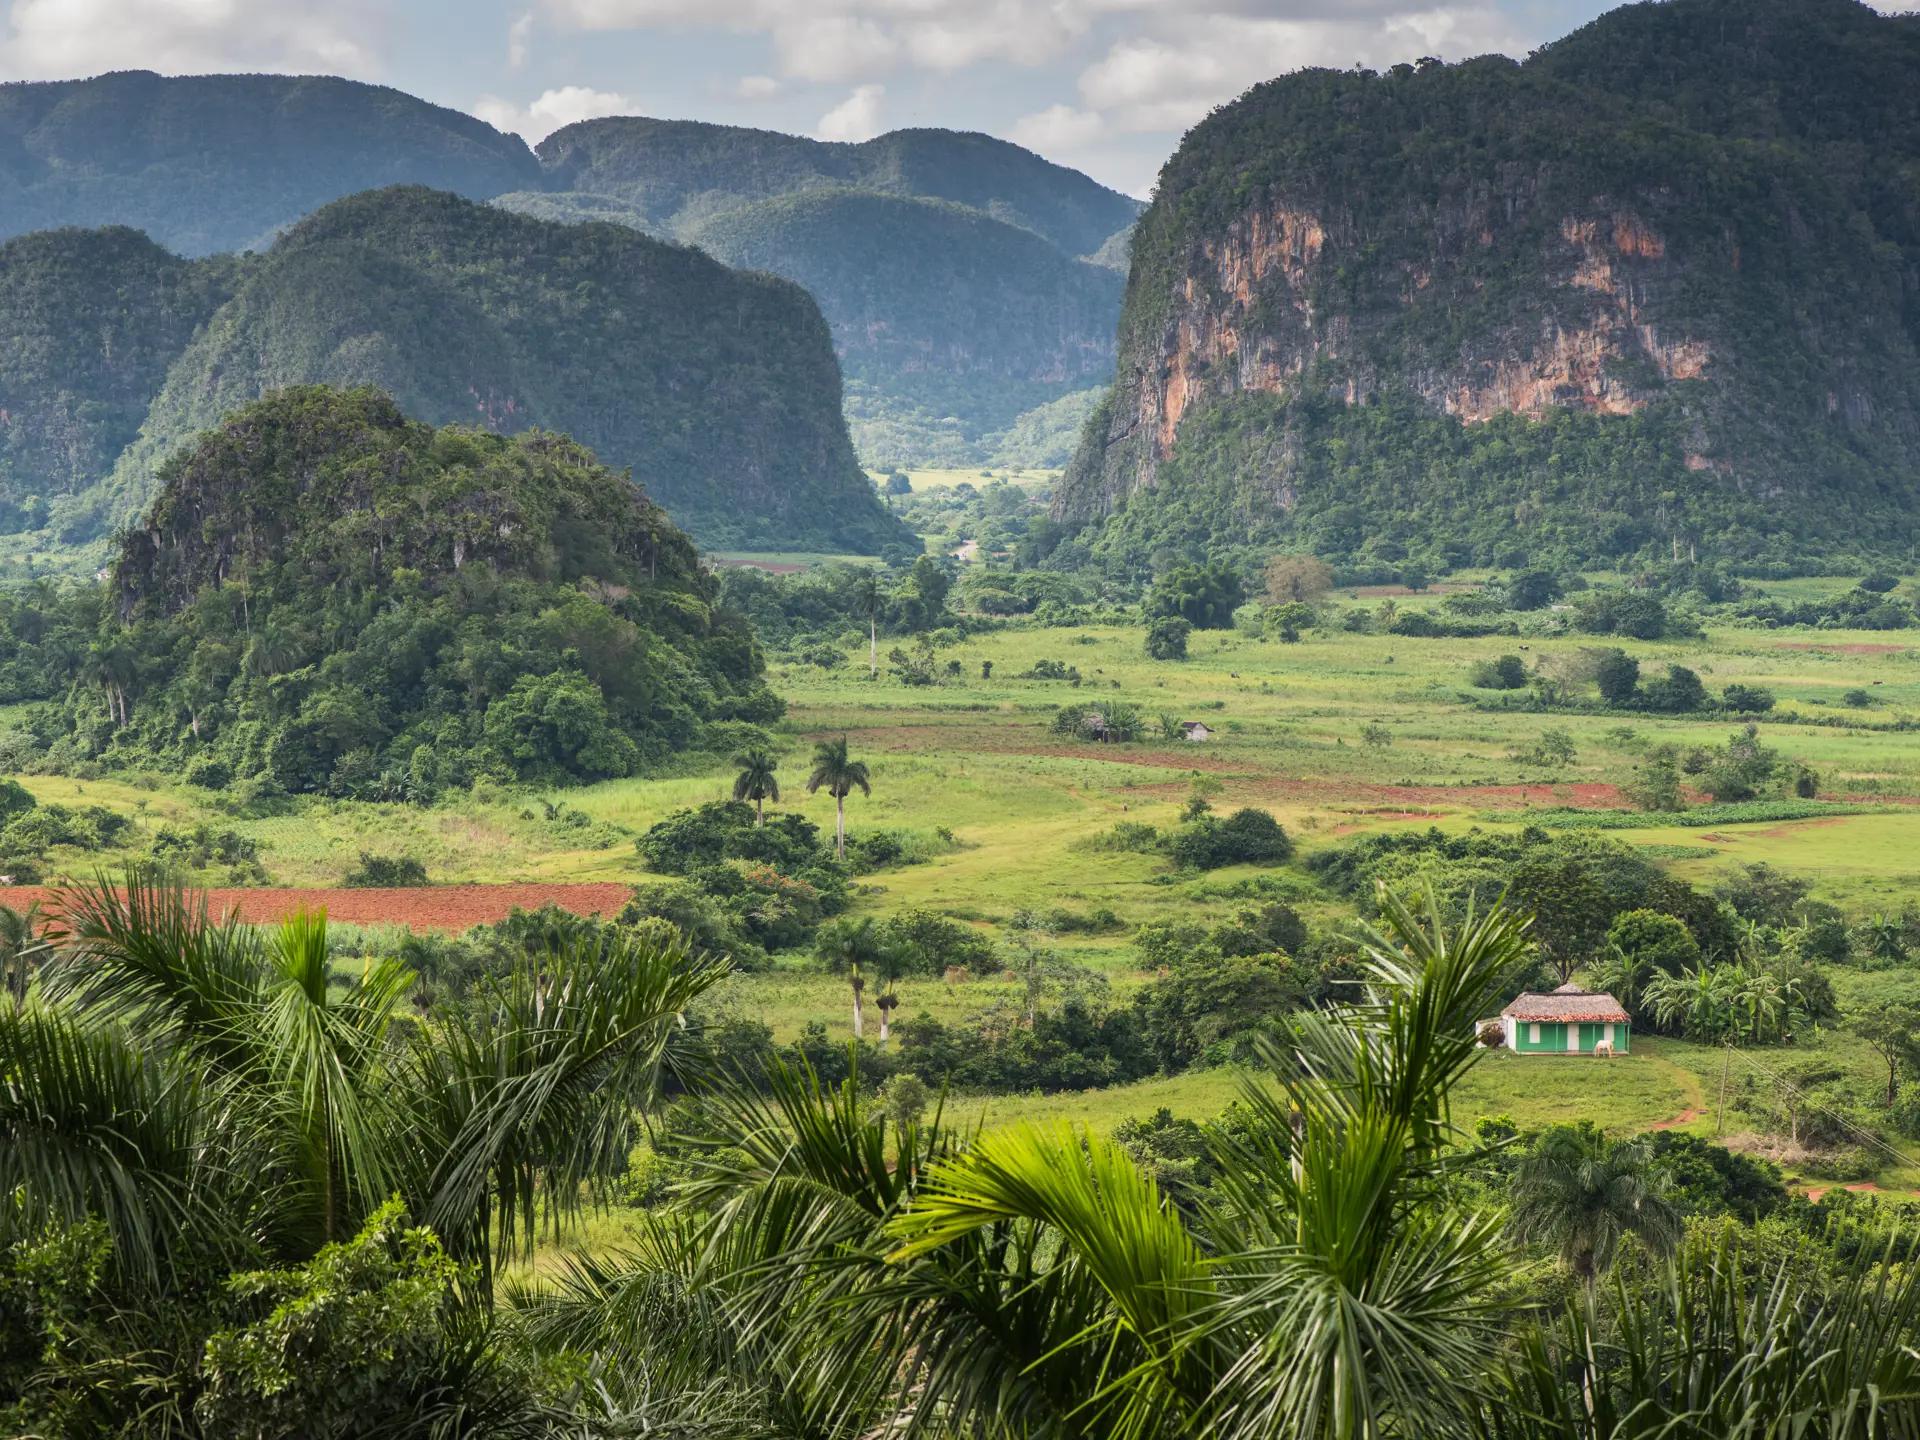 shutterstock_323530409 Panoramic view over landscape with mogotes in Vinales Valley ,Cuba.jpg